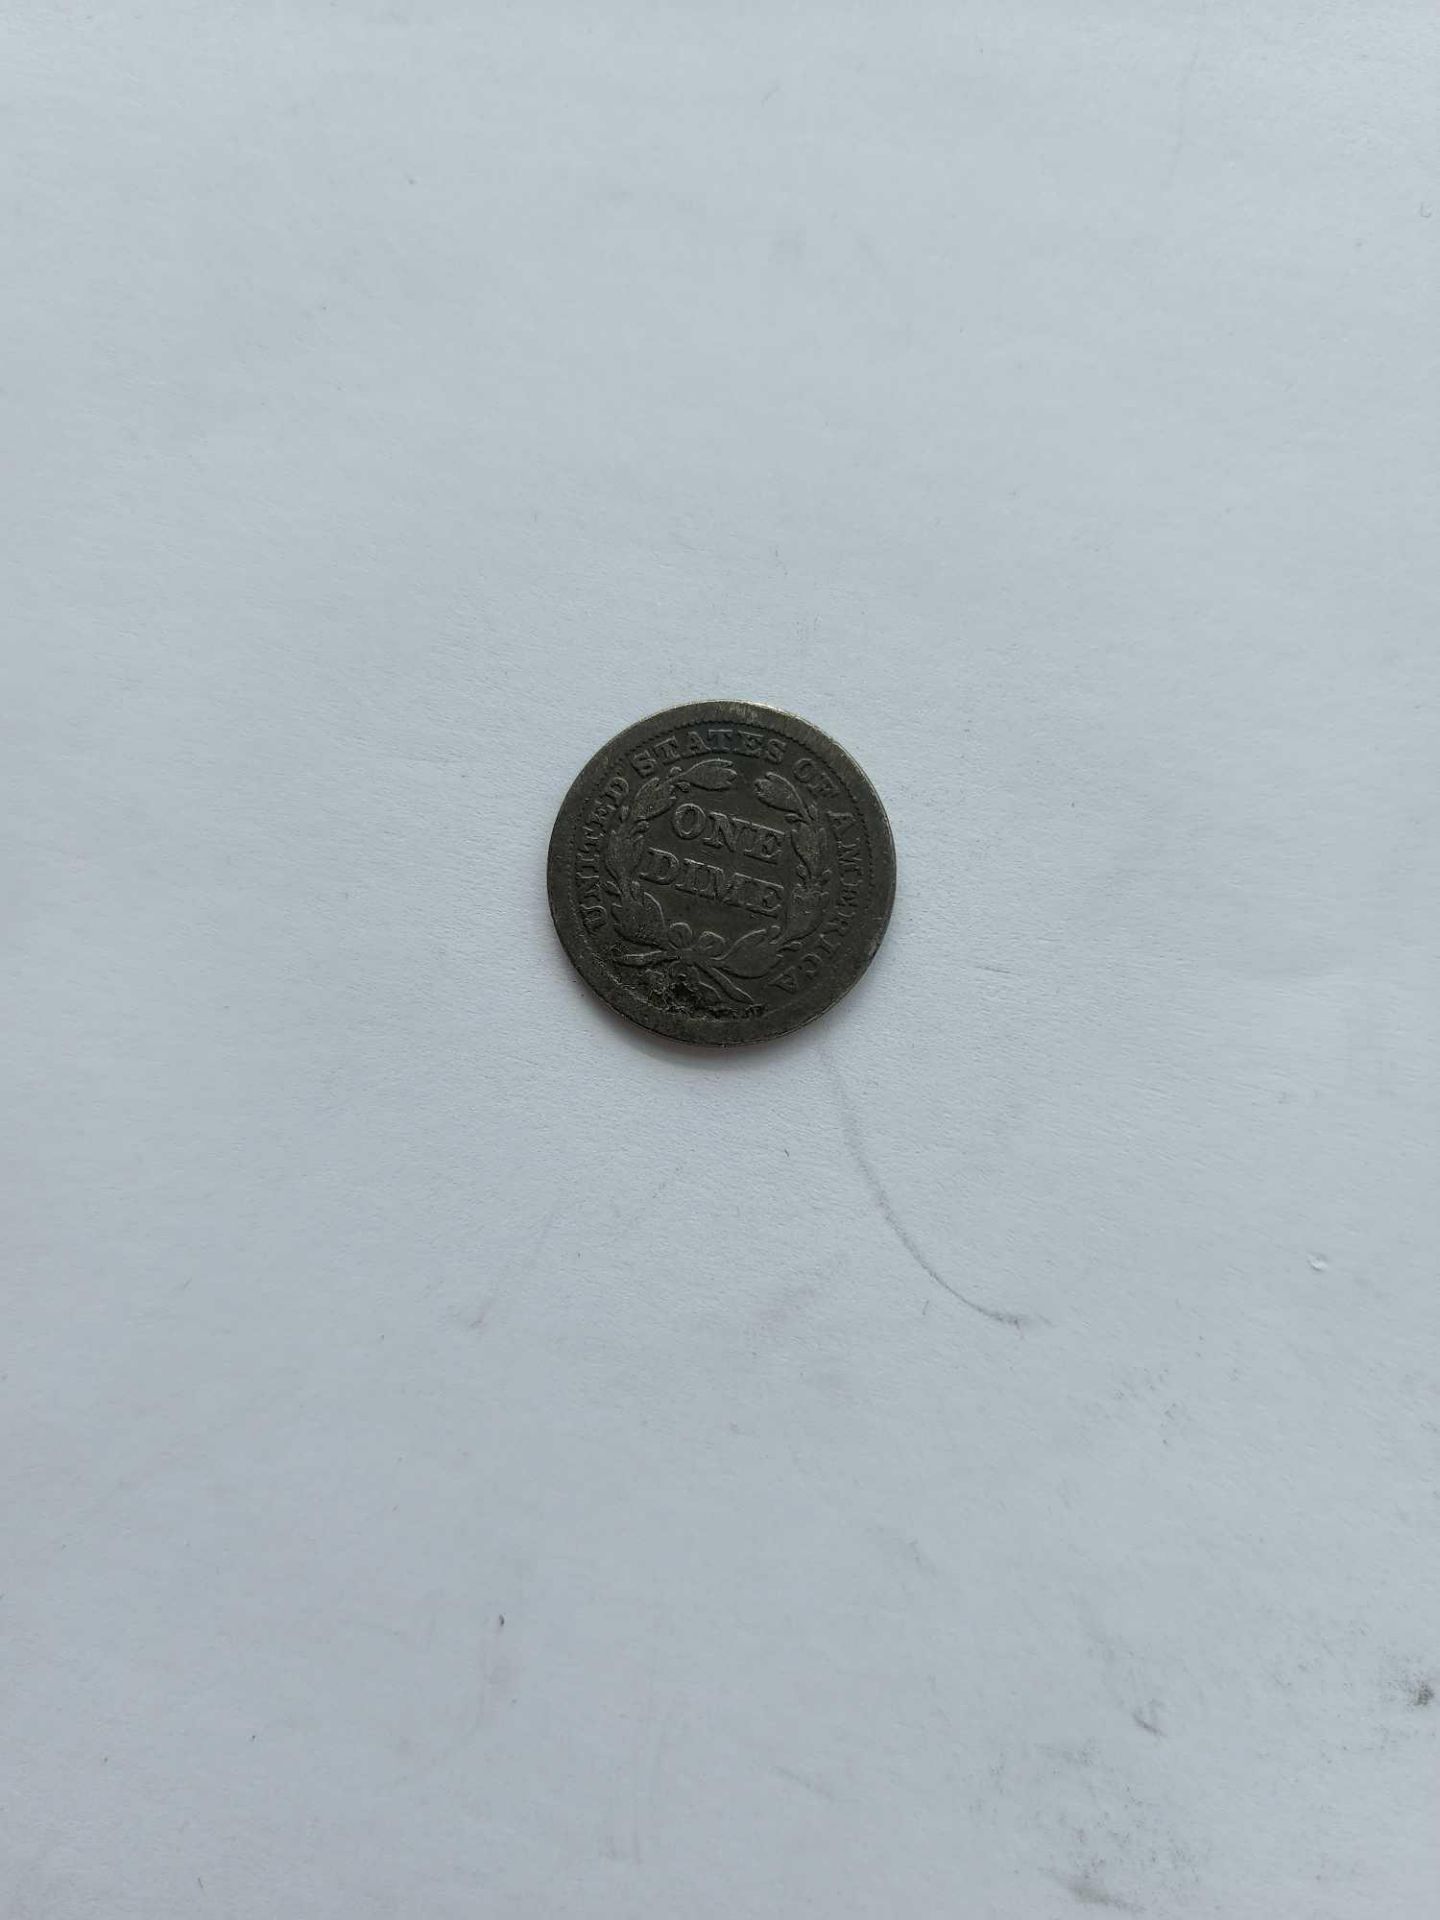 Rare US Coins and Silver Barber Quarter - Image 8 of 8